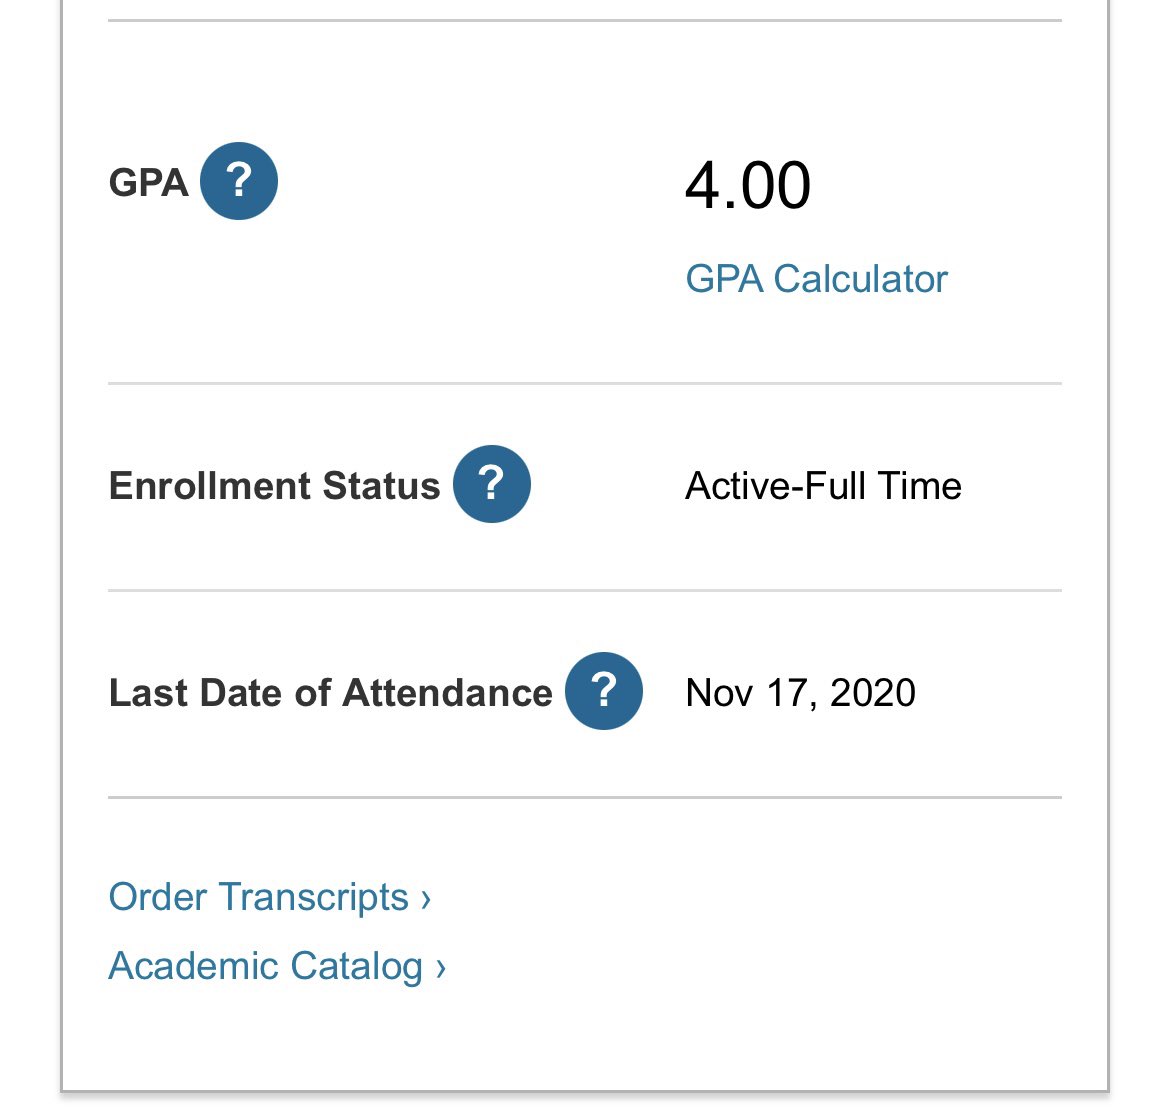 Couldn’t be prouder of myself right now #educationalgoals #perfectGPA #killingit